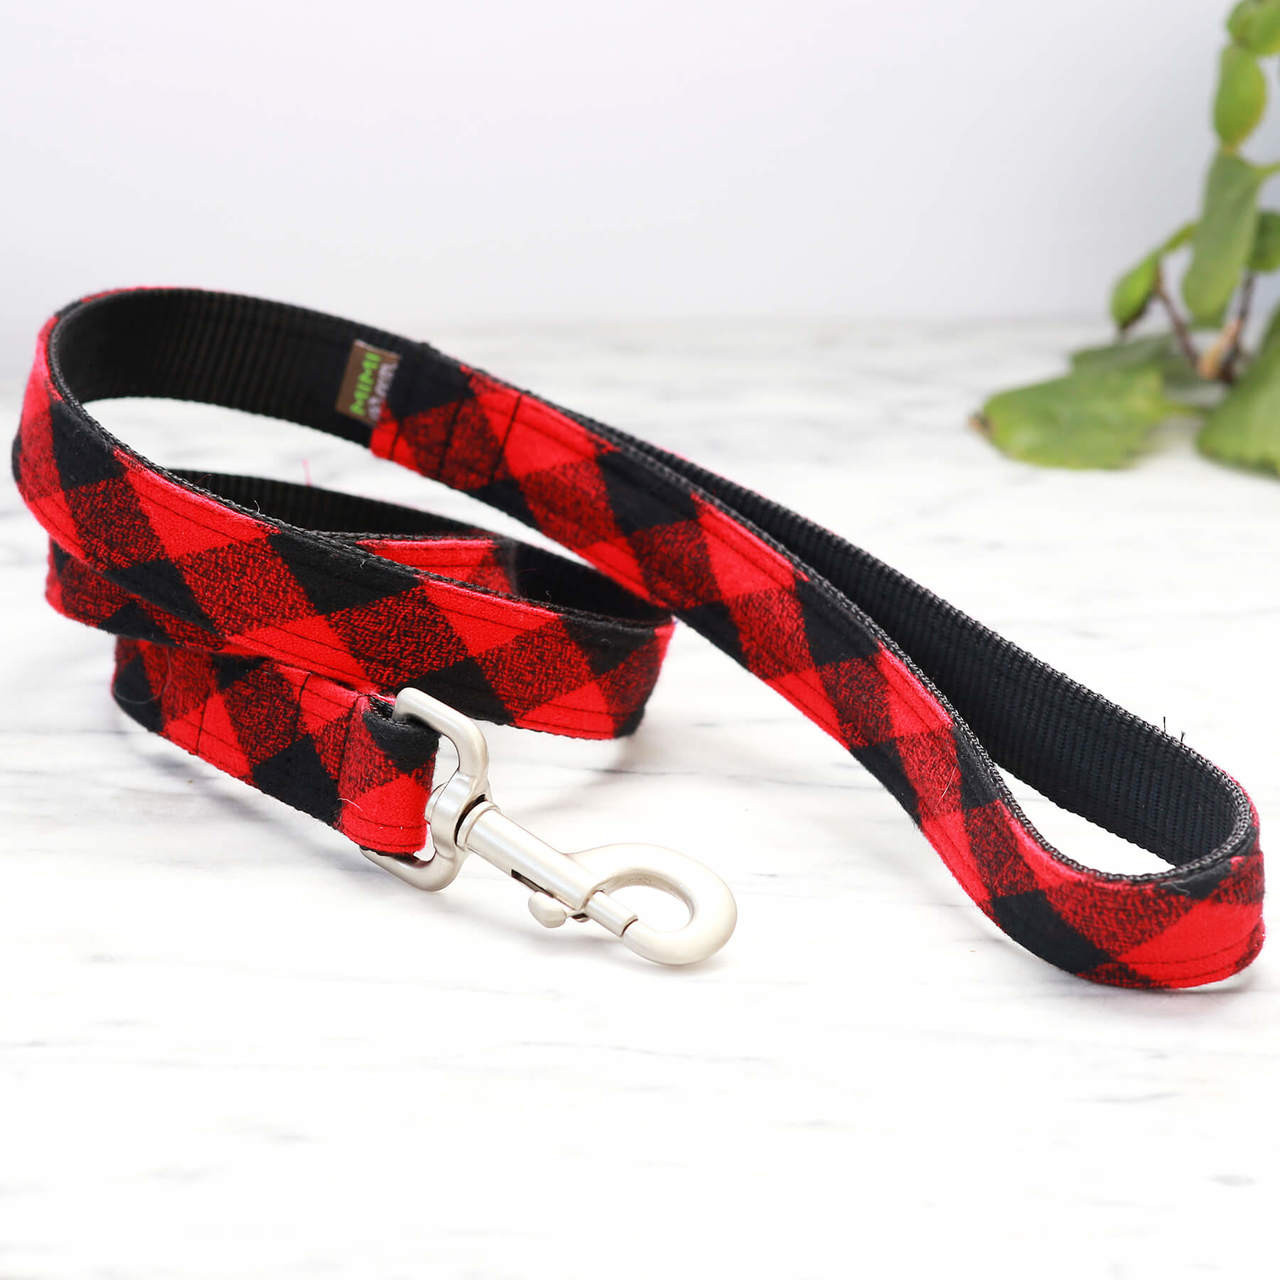 Engraved Buckle Flannel Personalized Dog Collars